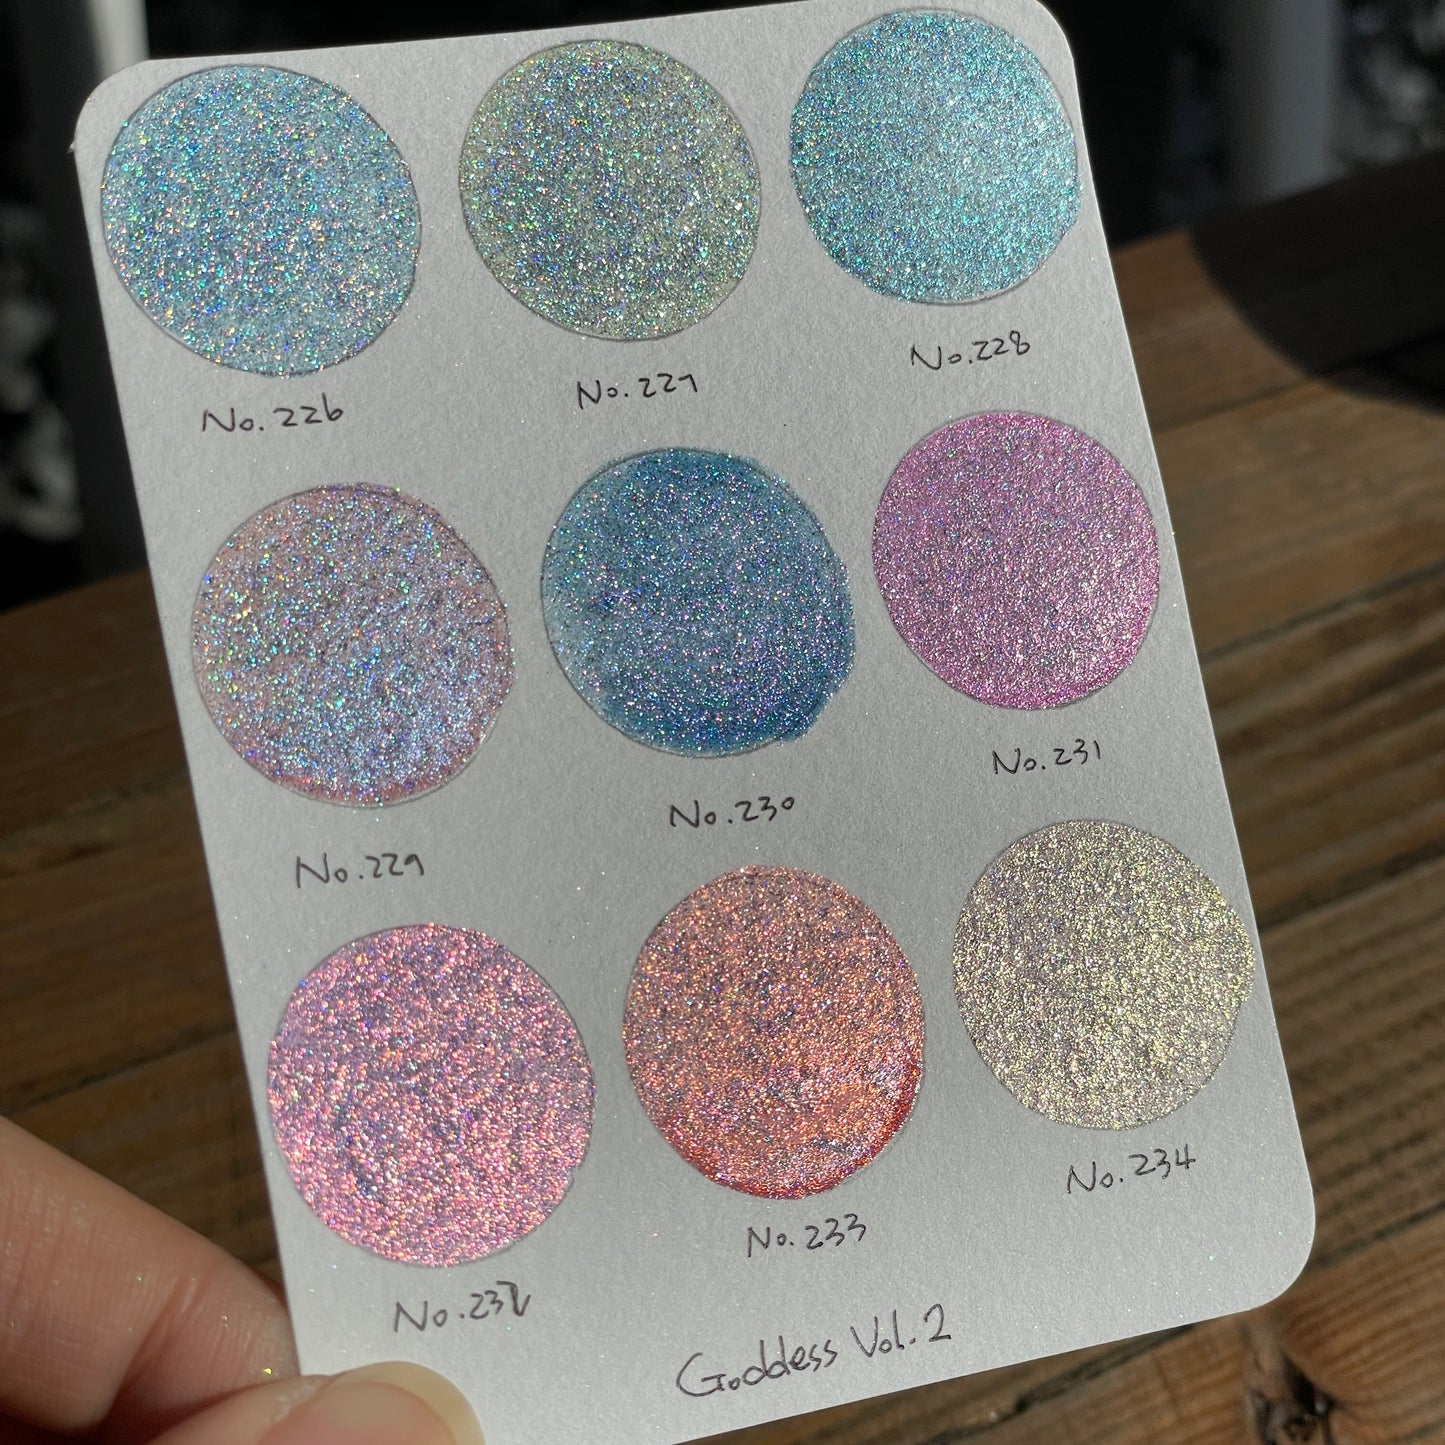 Limited No.233 Vol.2 Goddess Handmade Super Shift Aurora Shimmer Holographic Watercolor Paints by iuilewatercolors